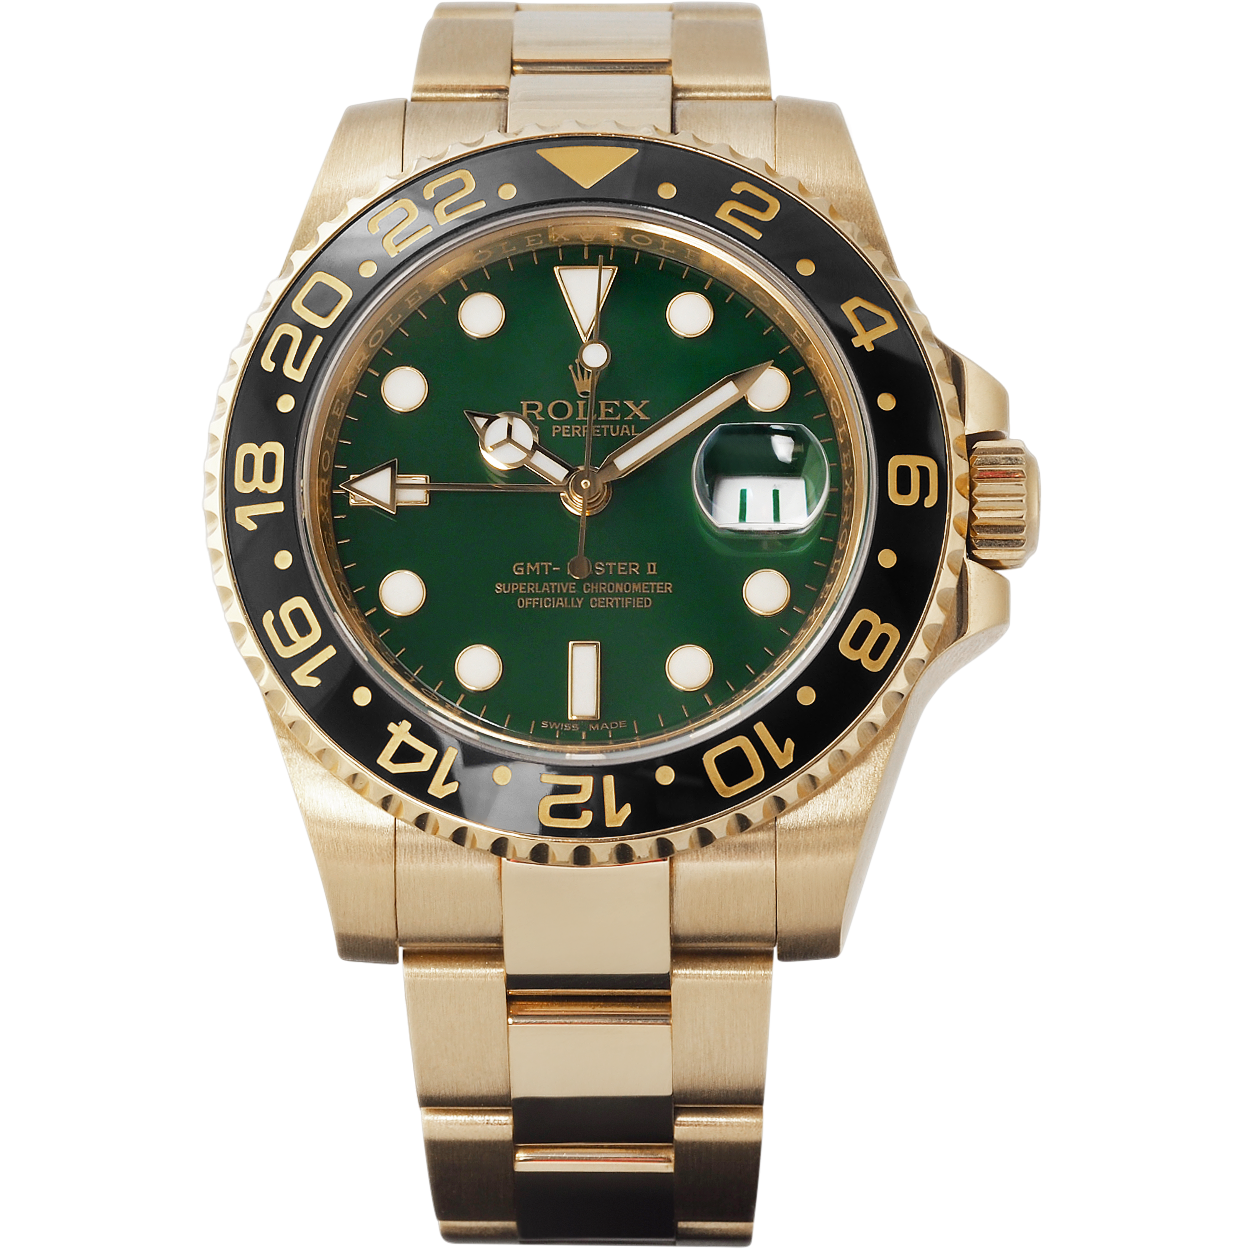 Rolex Oyster Perpetual Date GMT-Master II Yellow gold (116718LN-0002)